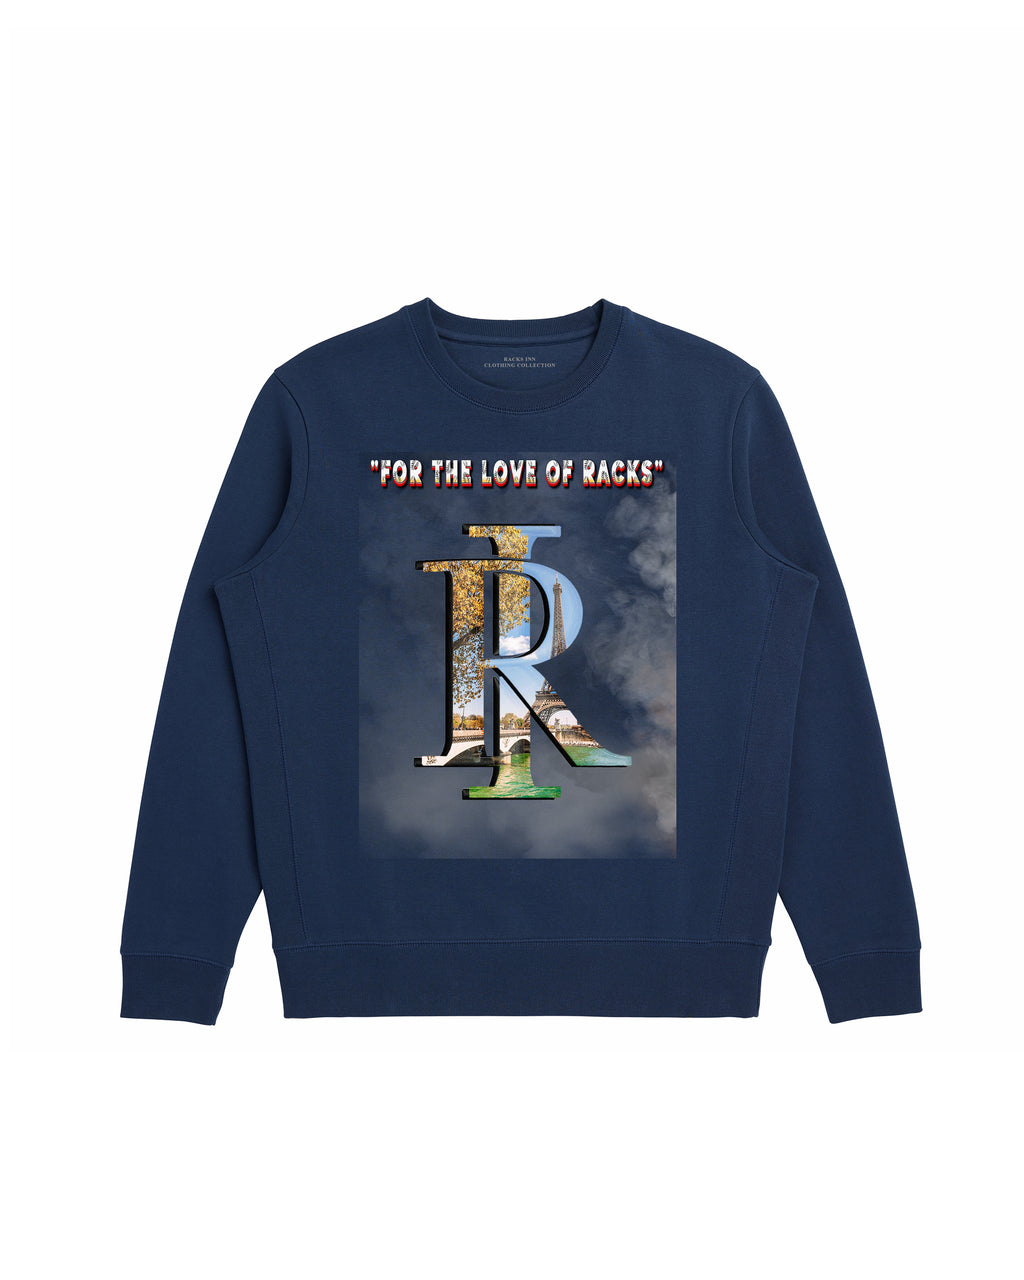 For The Love Crewneck - Navy